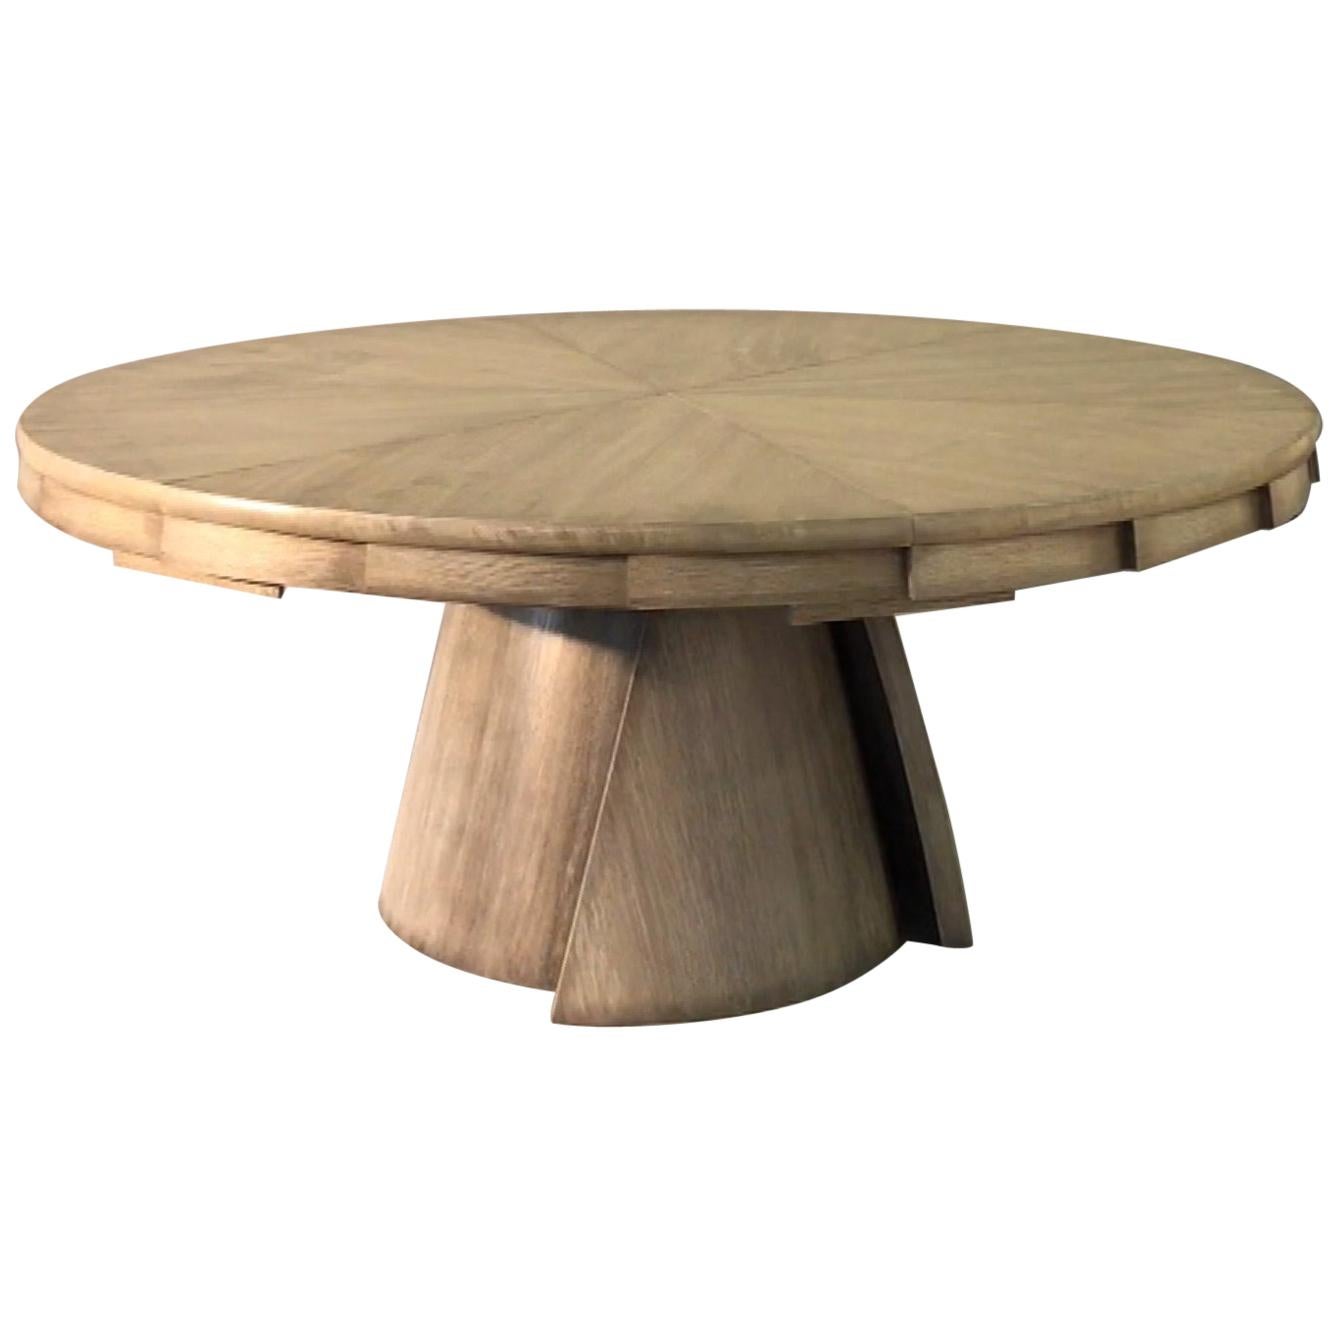 Nautilus Inspired Expanding Table For Sale